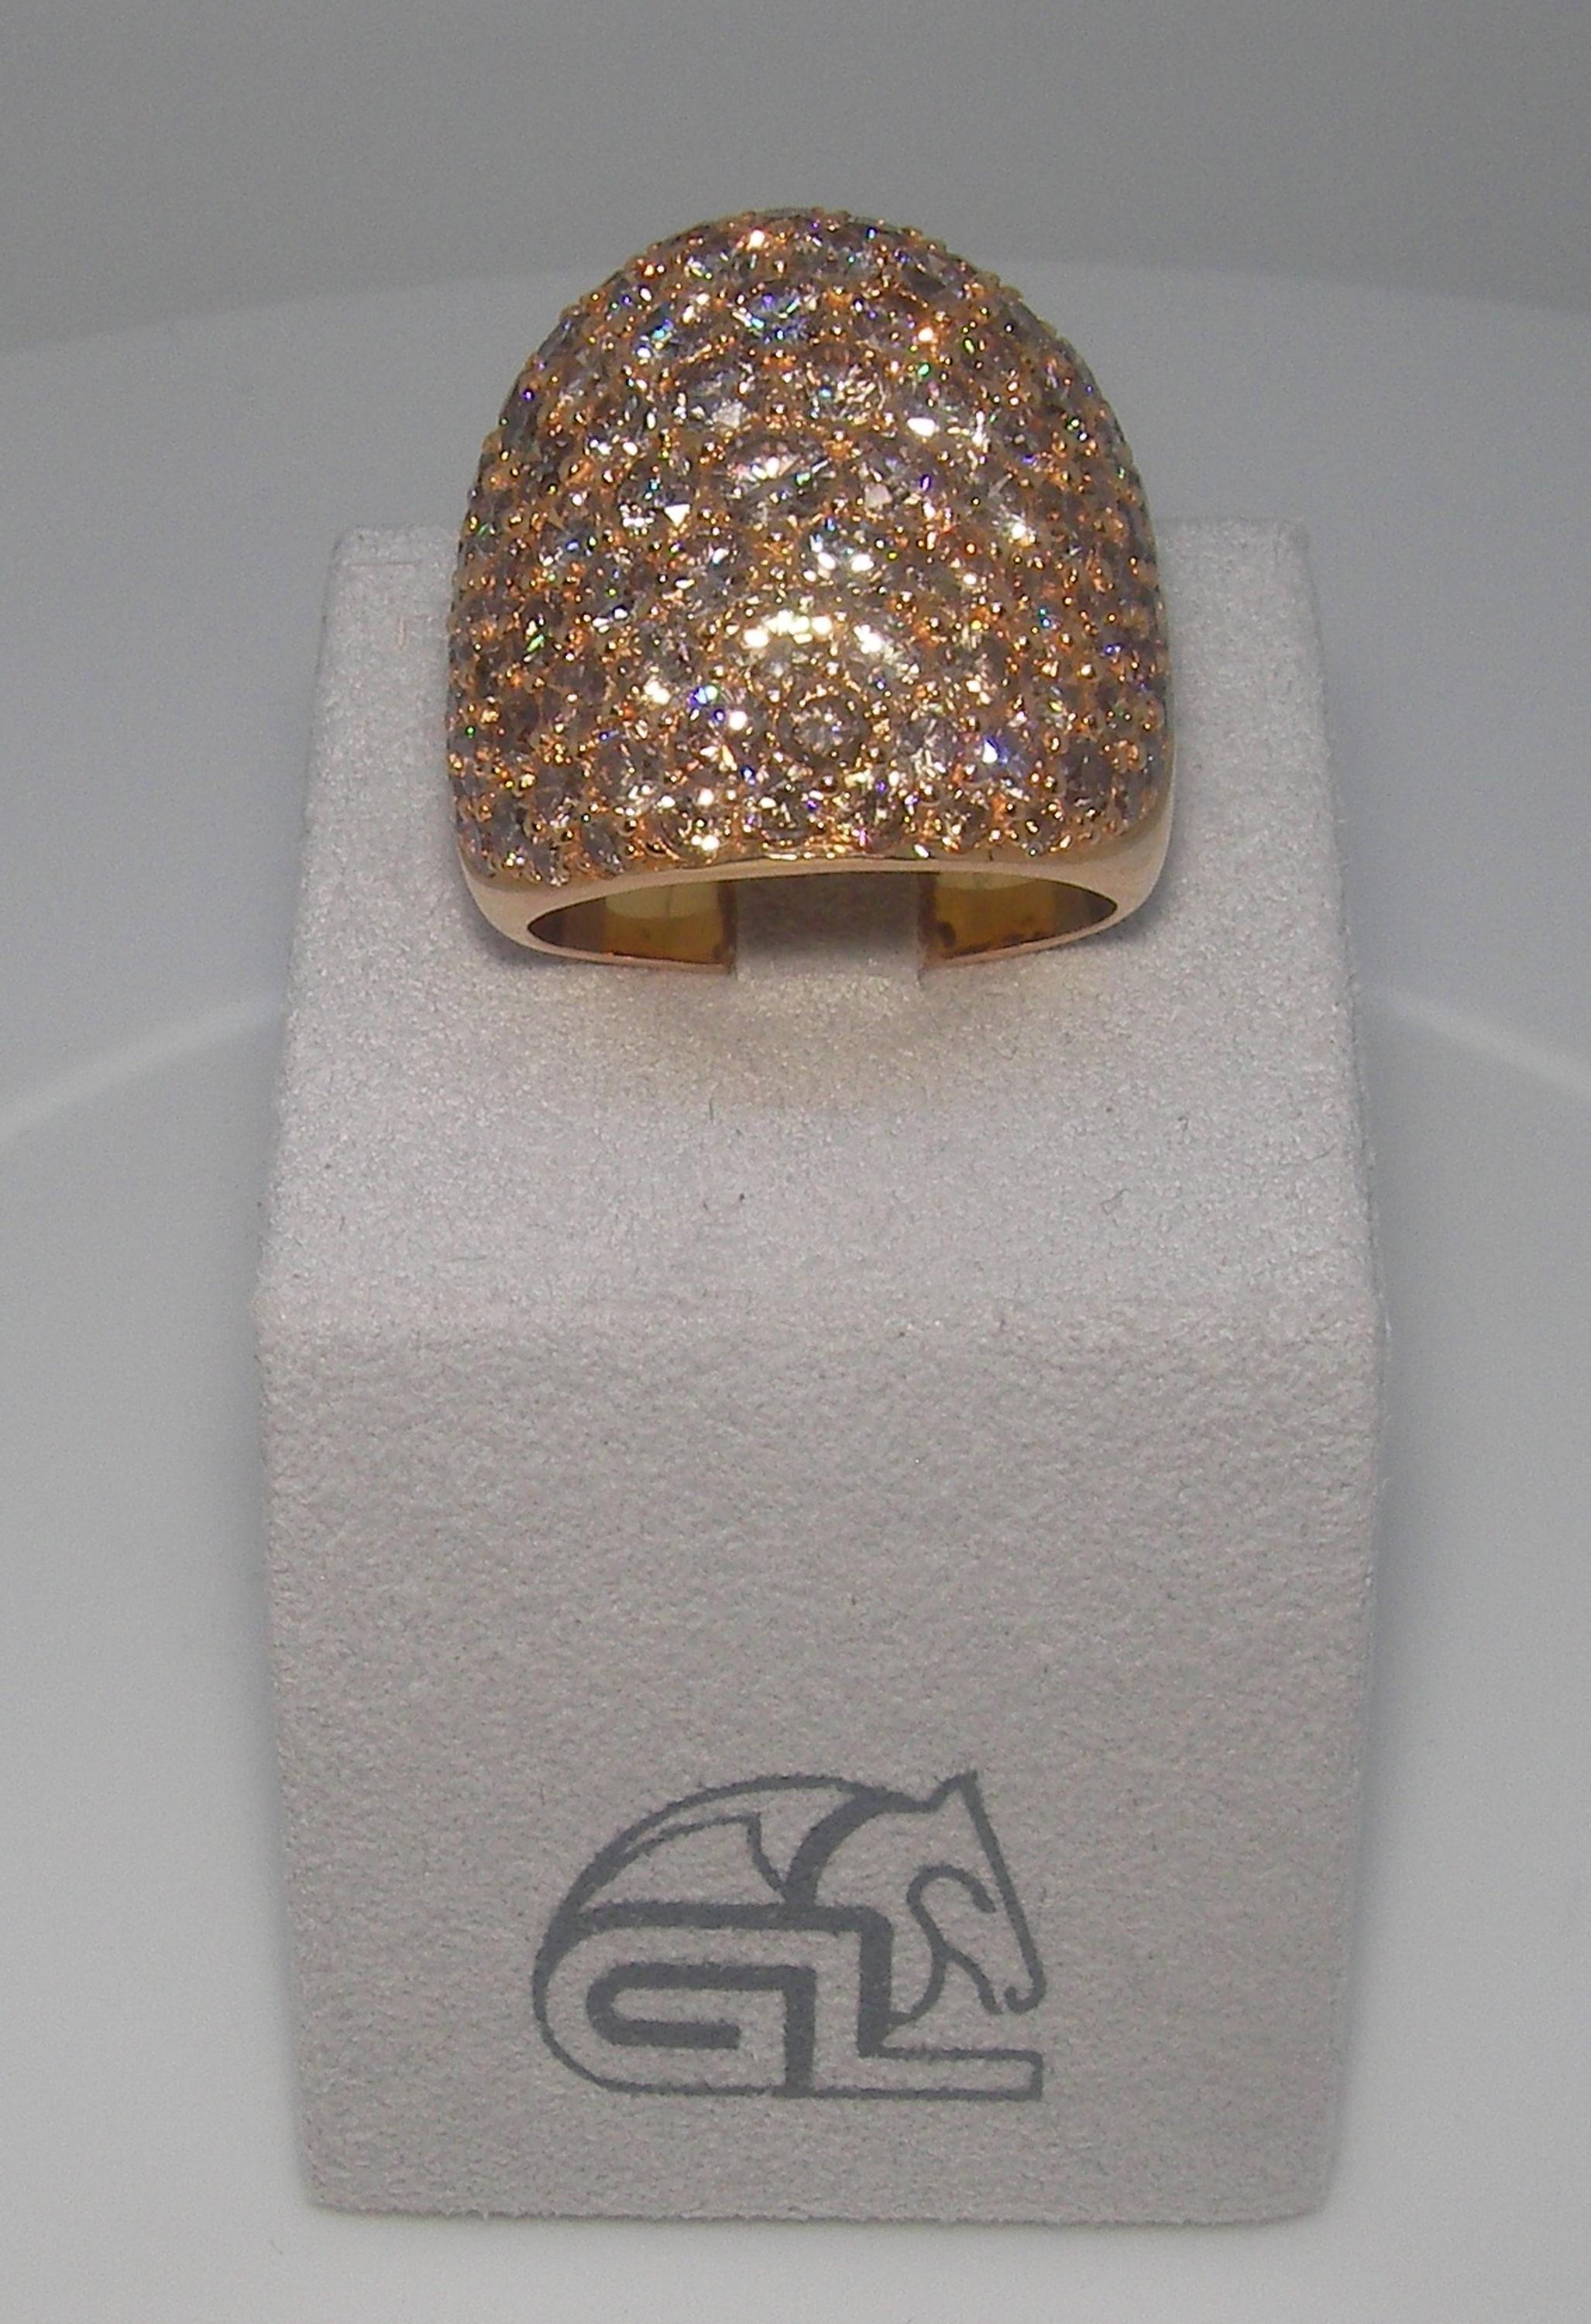 18 Karat Rose Gold Cognac Diamond Cocktail Pflasterring 

93 Cognac Diamonds 6.75 Carat

Size EU 54 US 7


Founded in 1974, Gianni Lazzaro is a family-owned jewelery company based out of Düsseldorf, Germany.
Although rooted in Germany, Gianni